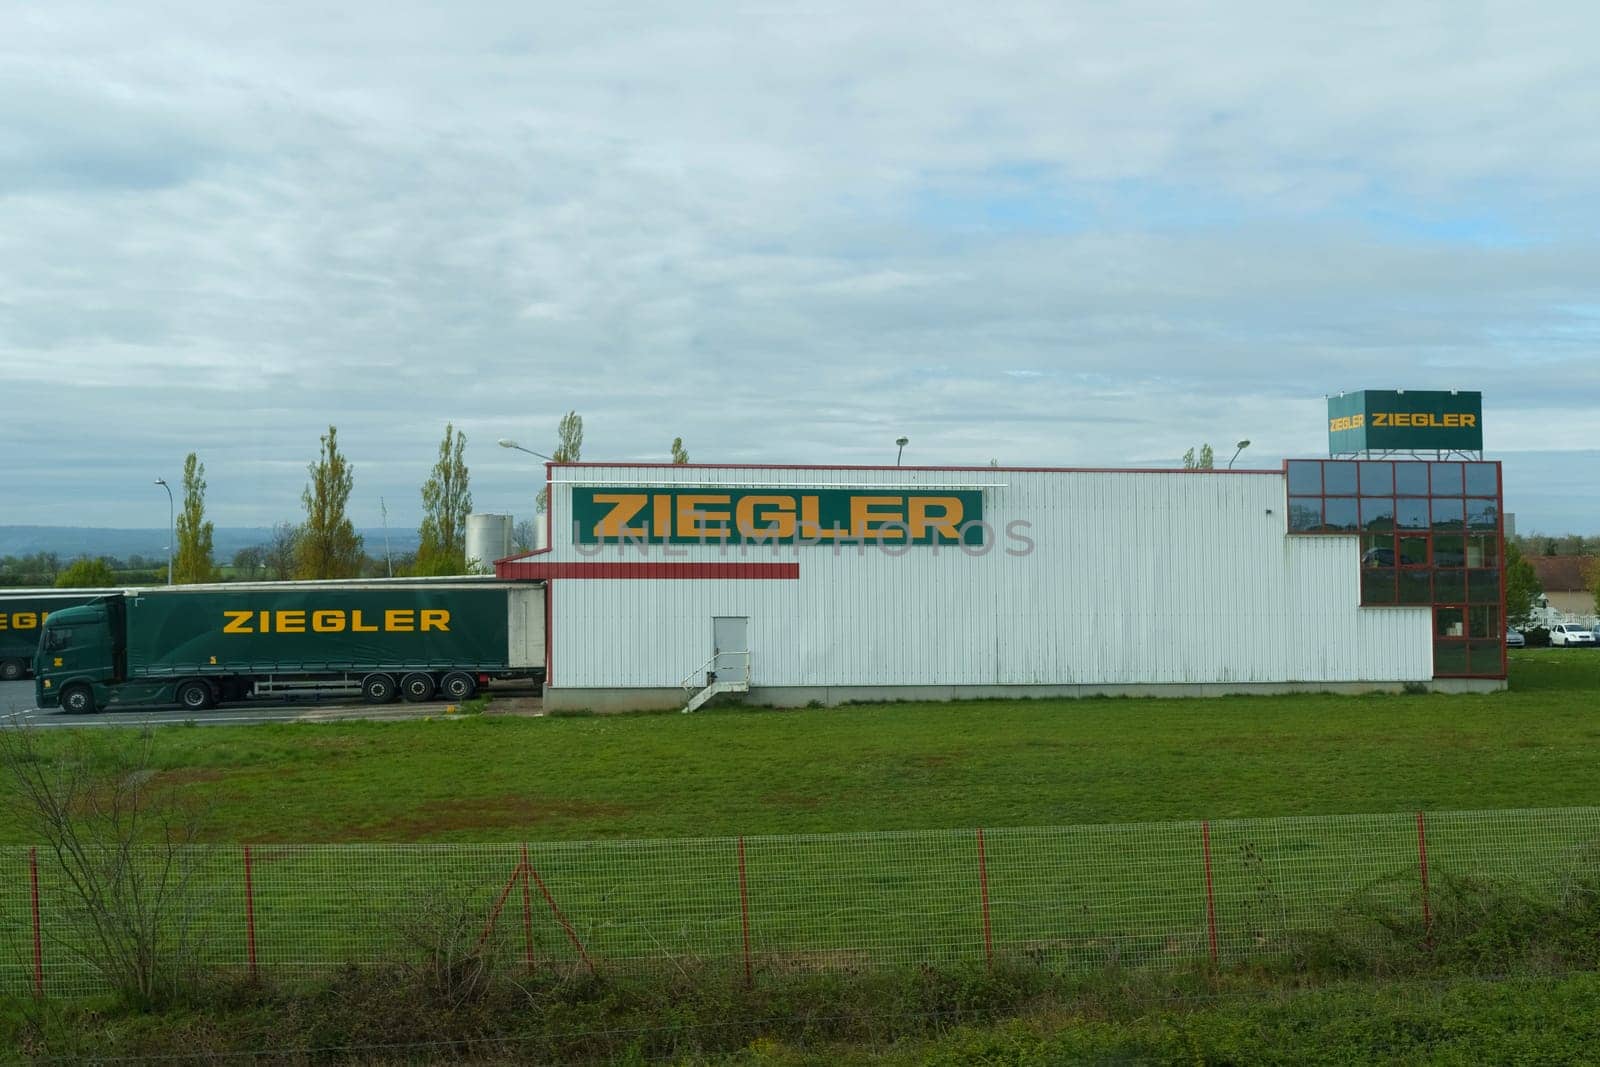 Ziegler Warehouse Exterior With Parked Logistics Truck by Sd28DimoN_1976